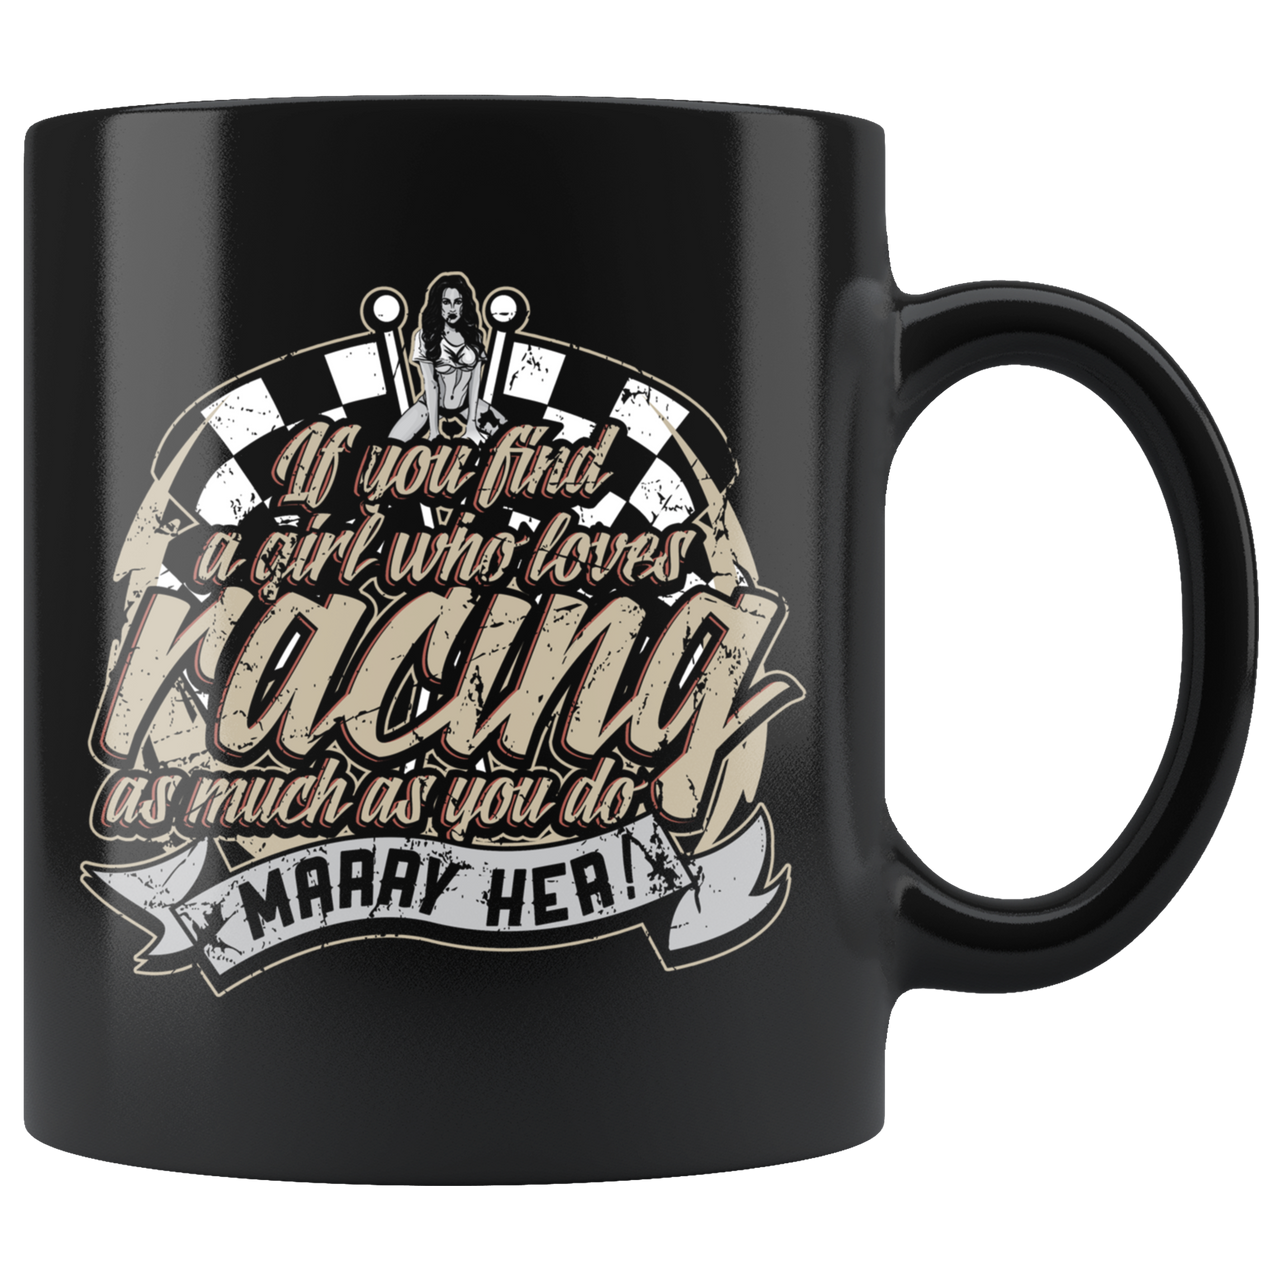 If You Find A Girl Who Loves Racing As Much As You Do Marry Her Mug!